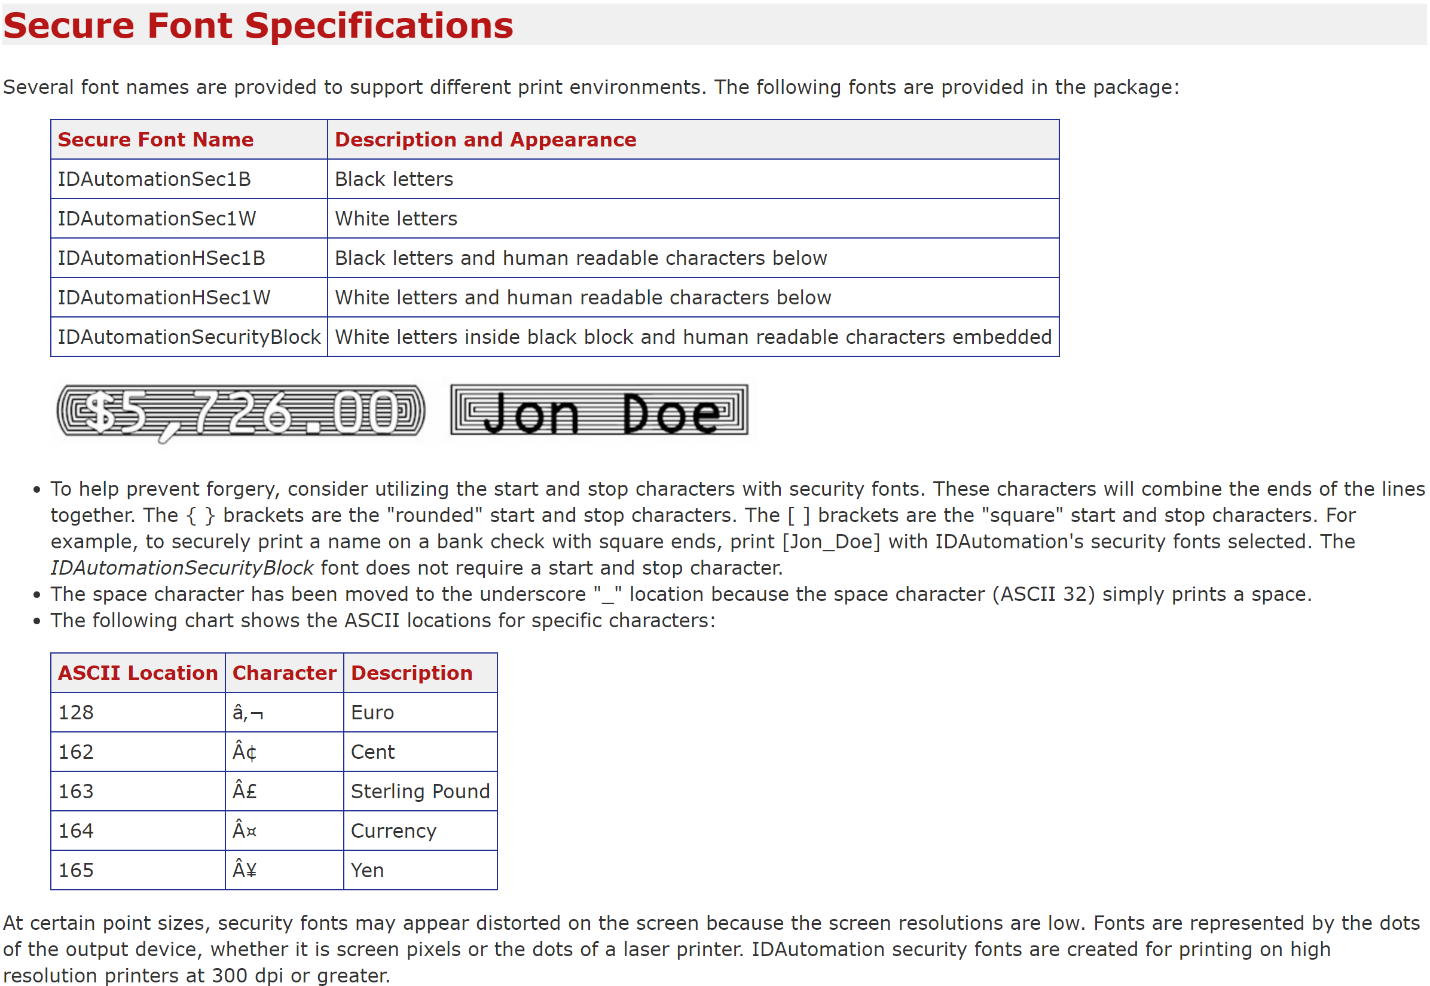 Check Security Font Specifications.